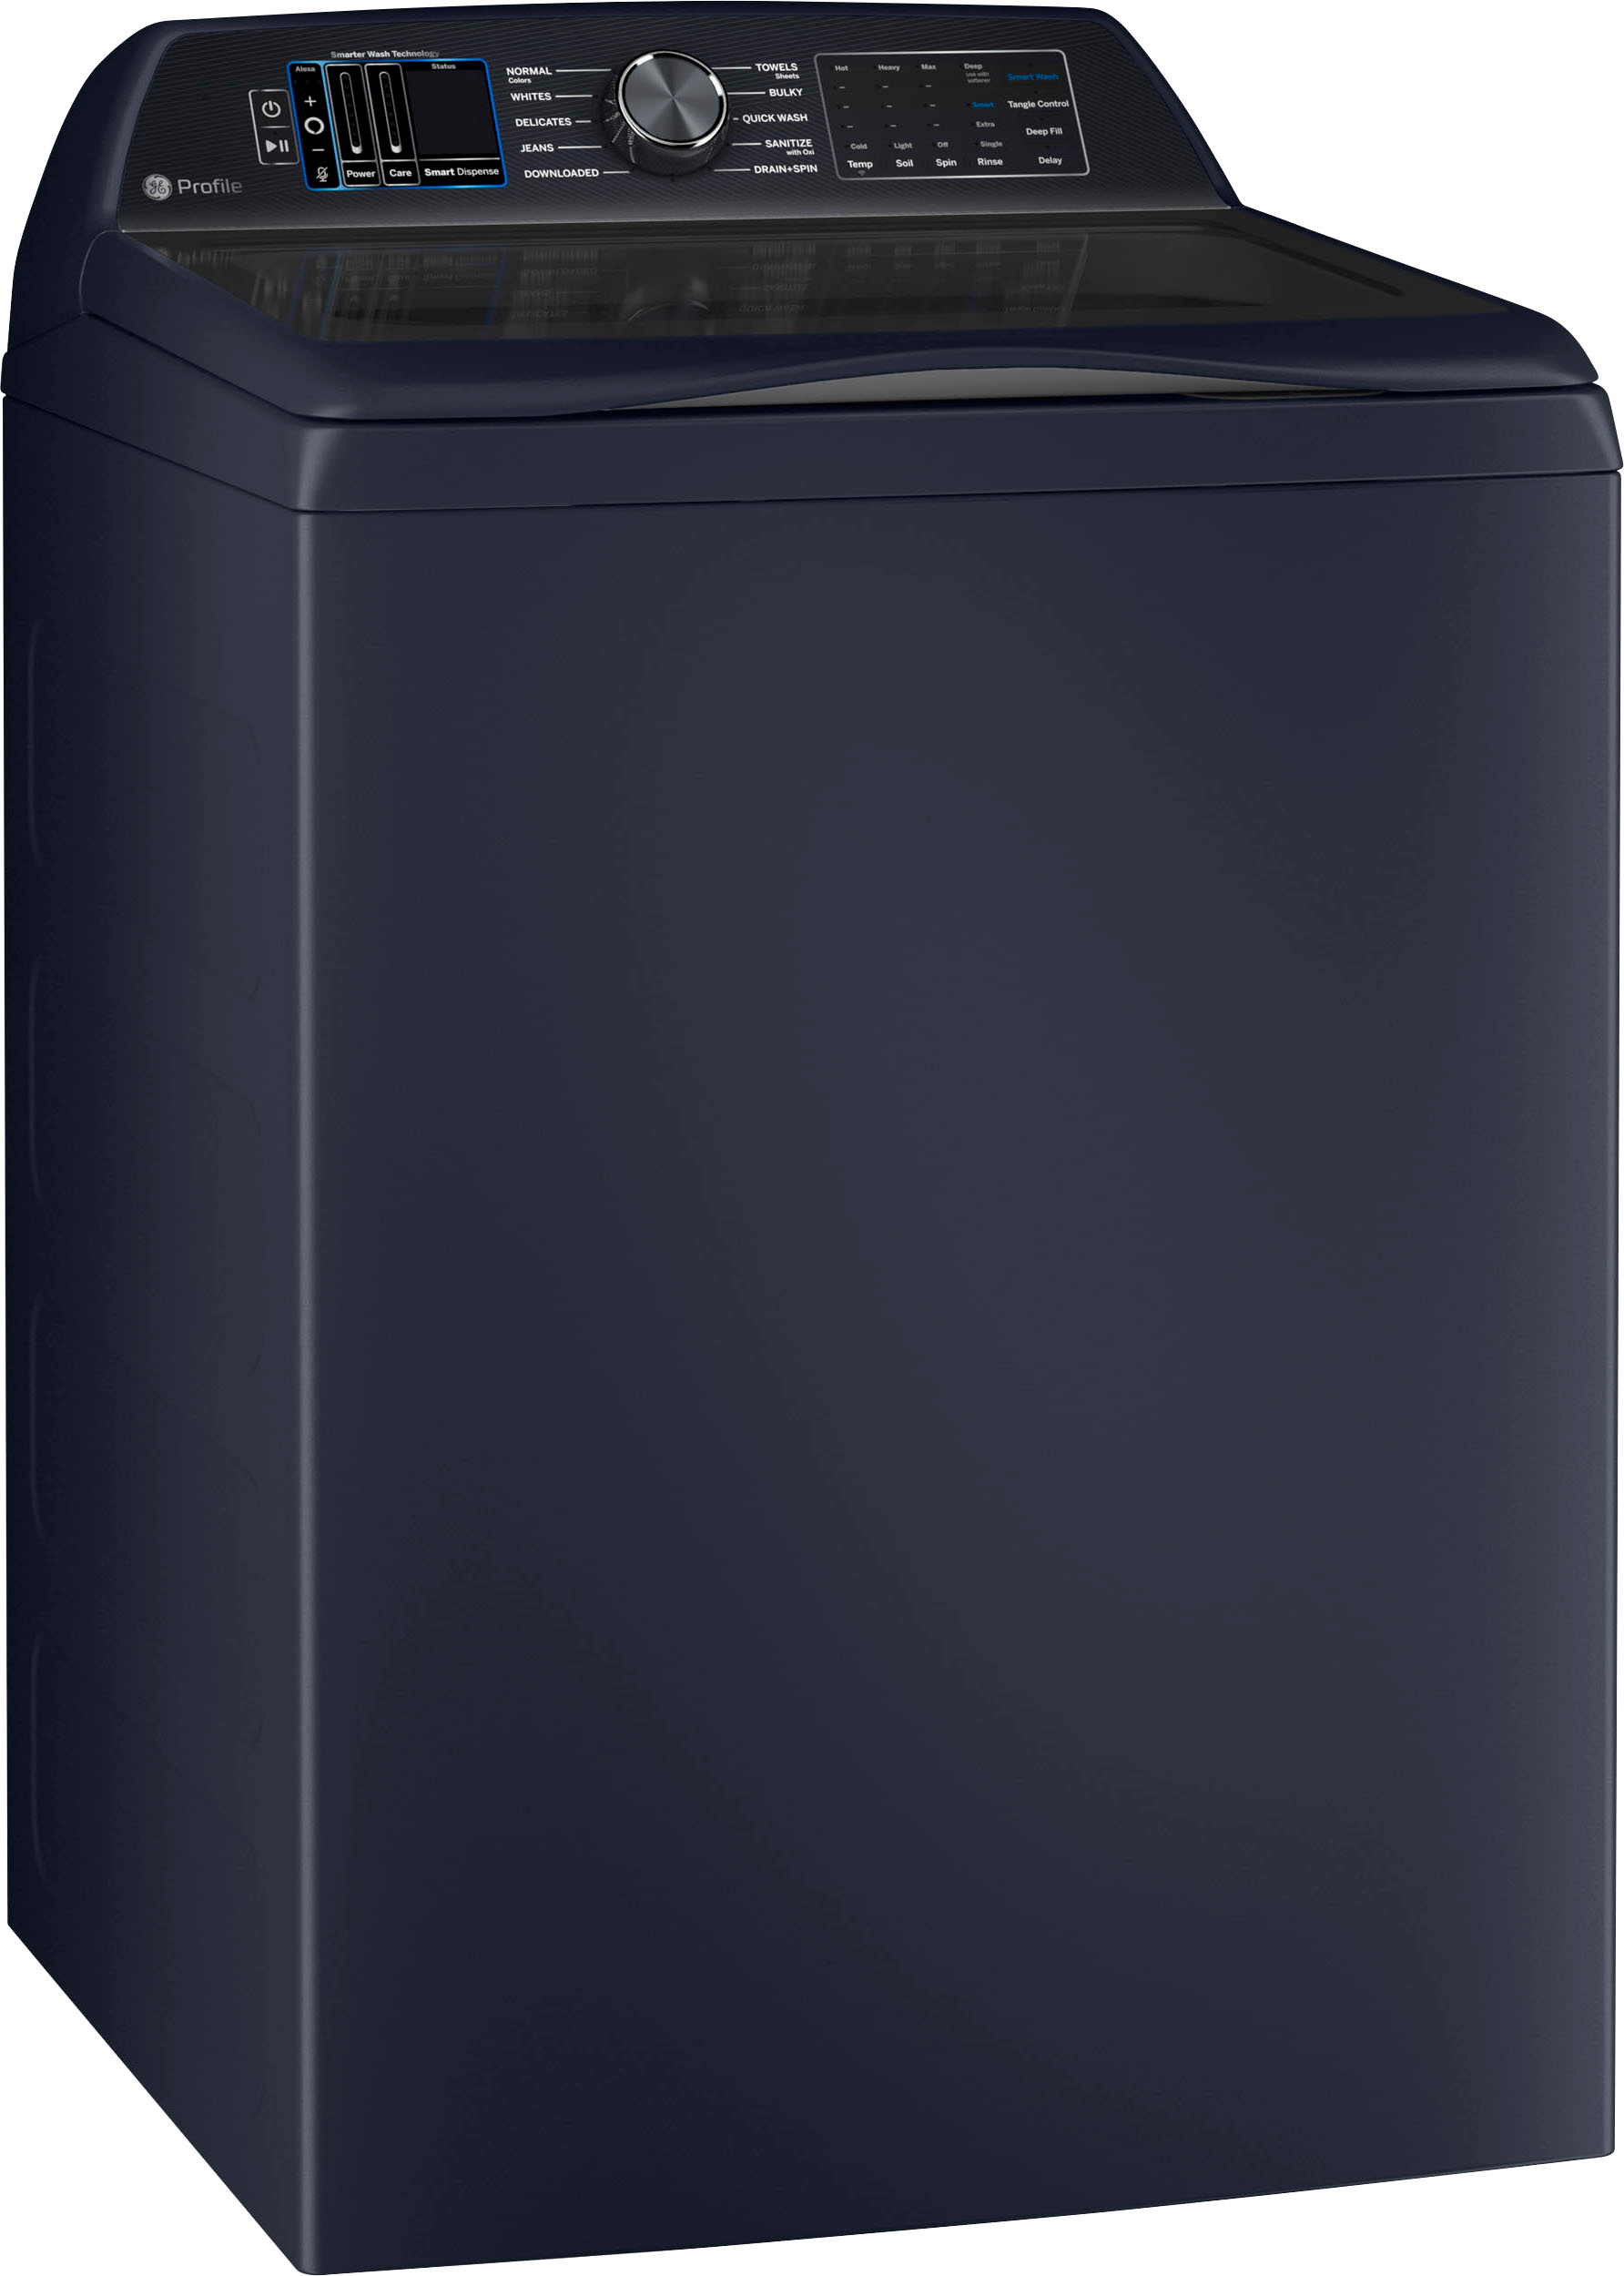 Angle View: Samsung - 5.0 cu. ft. Large Capacity Top Load Washer with Deep Fill and EZ Access Tub - Black